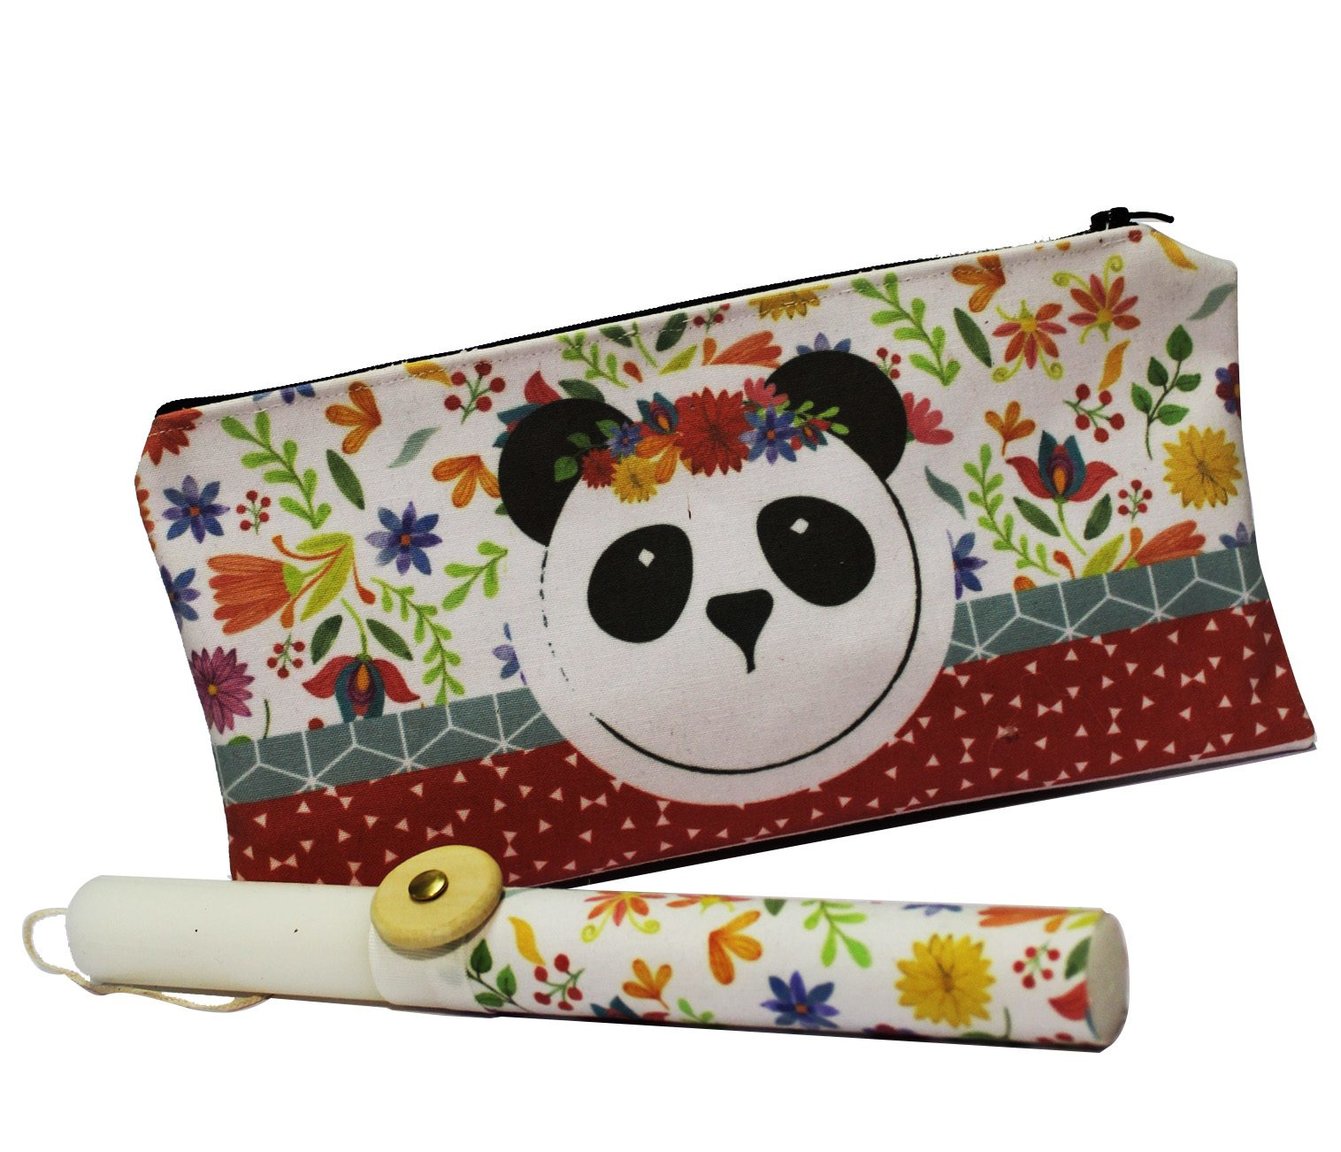 Handmade Easter candle with panda pencil case